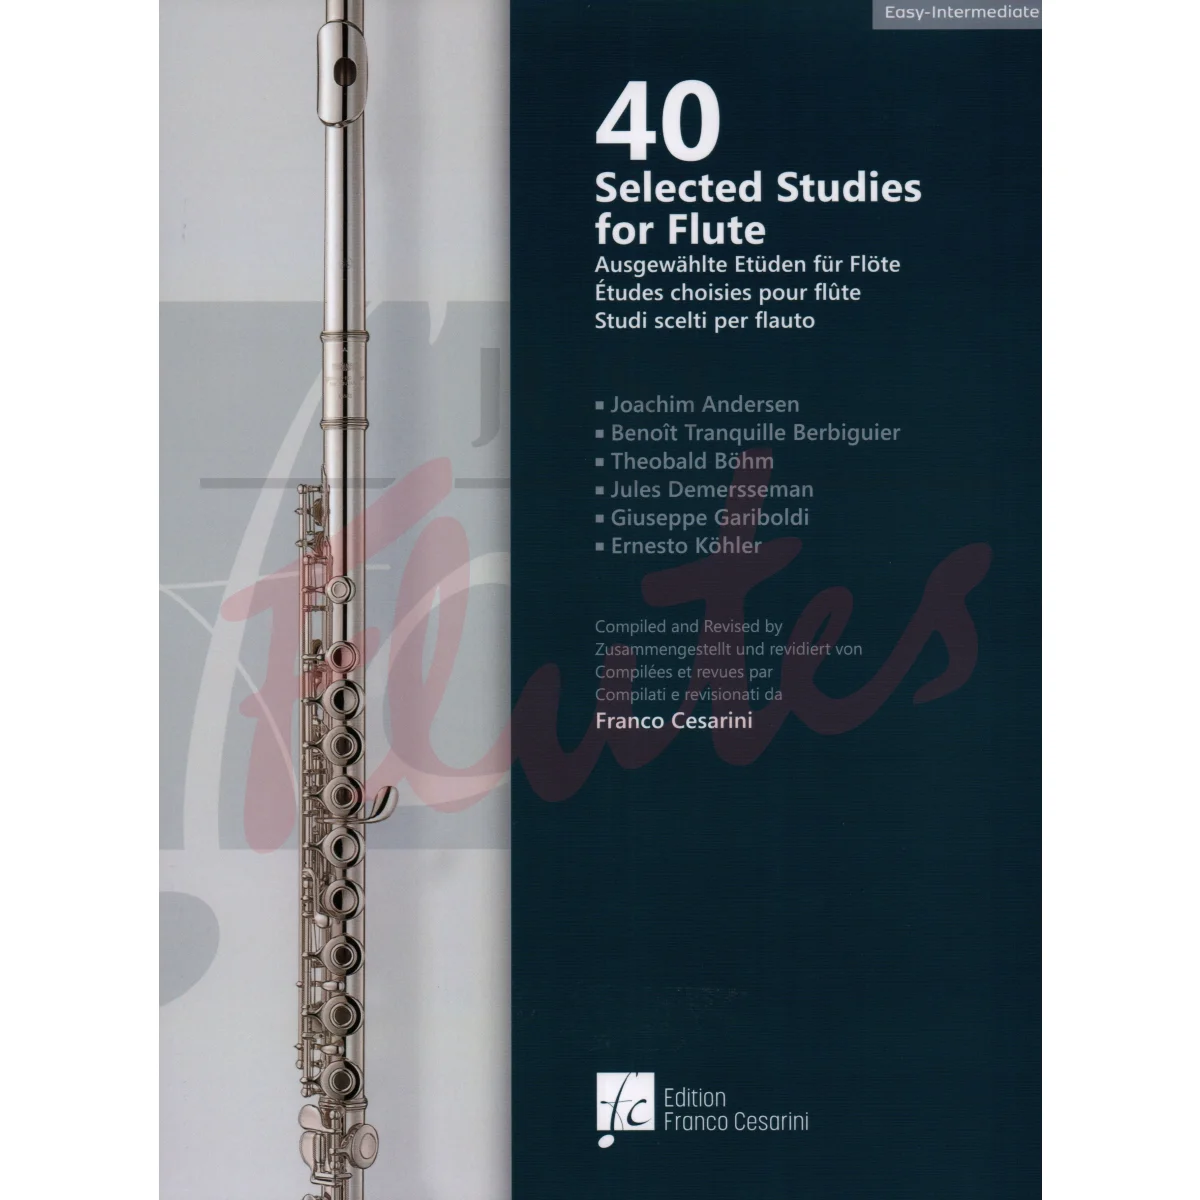 40 Selected Studies for Flute